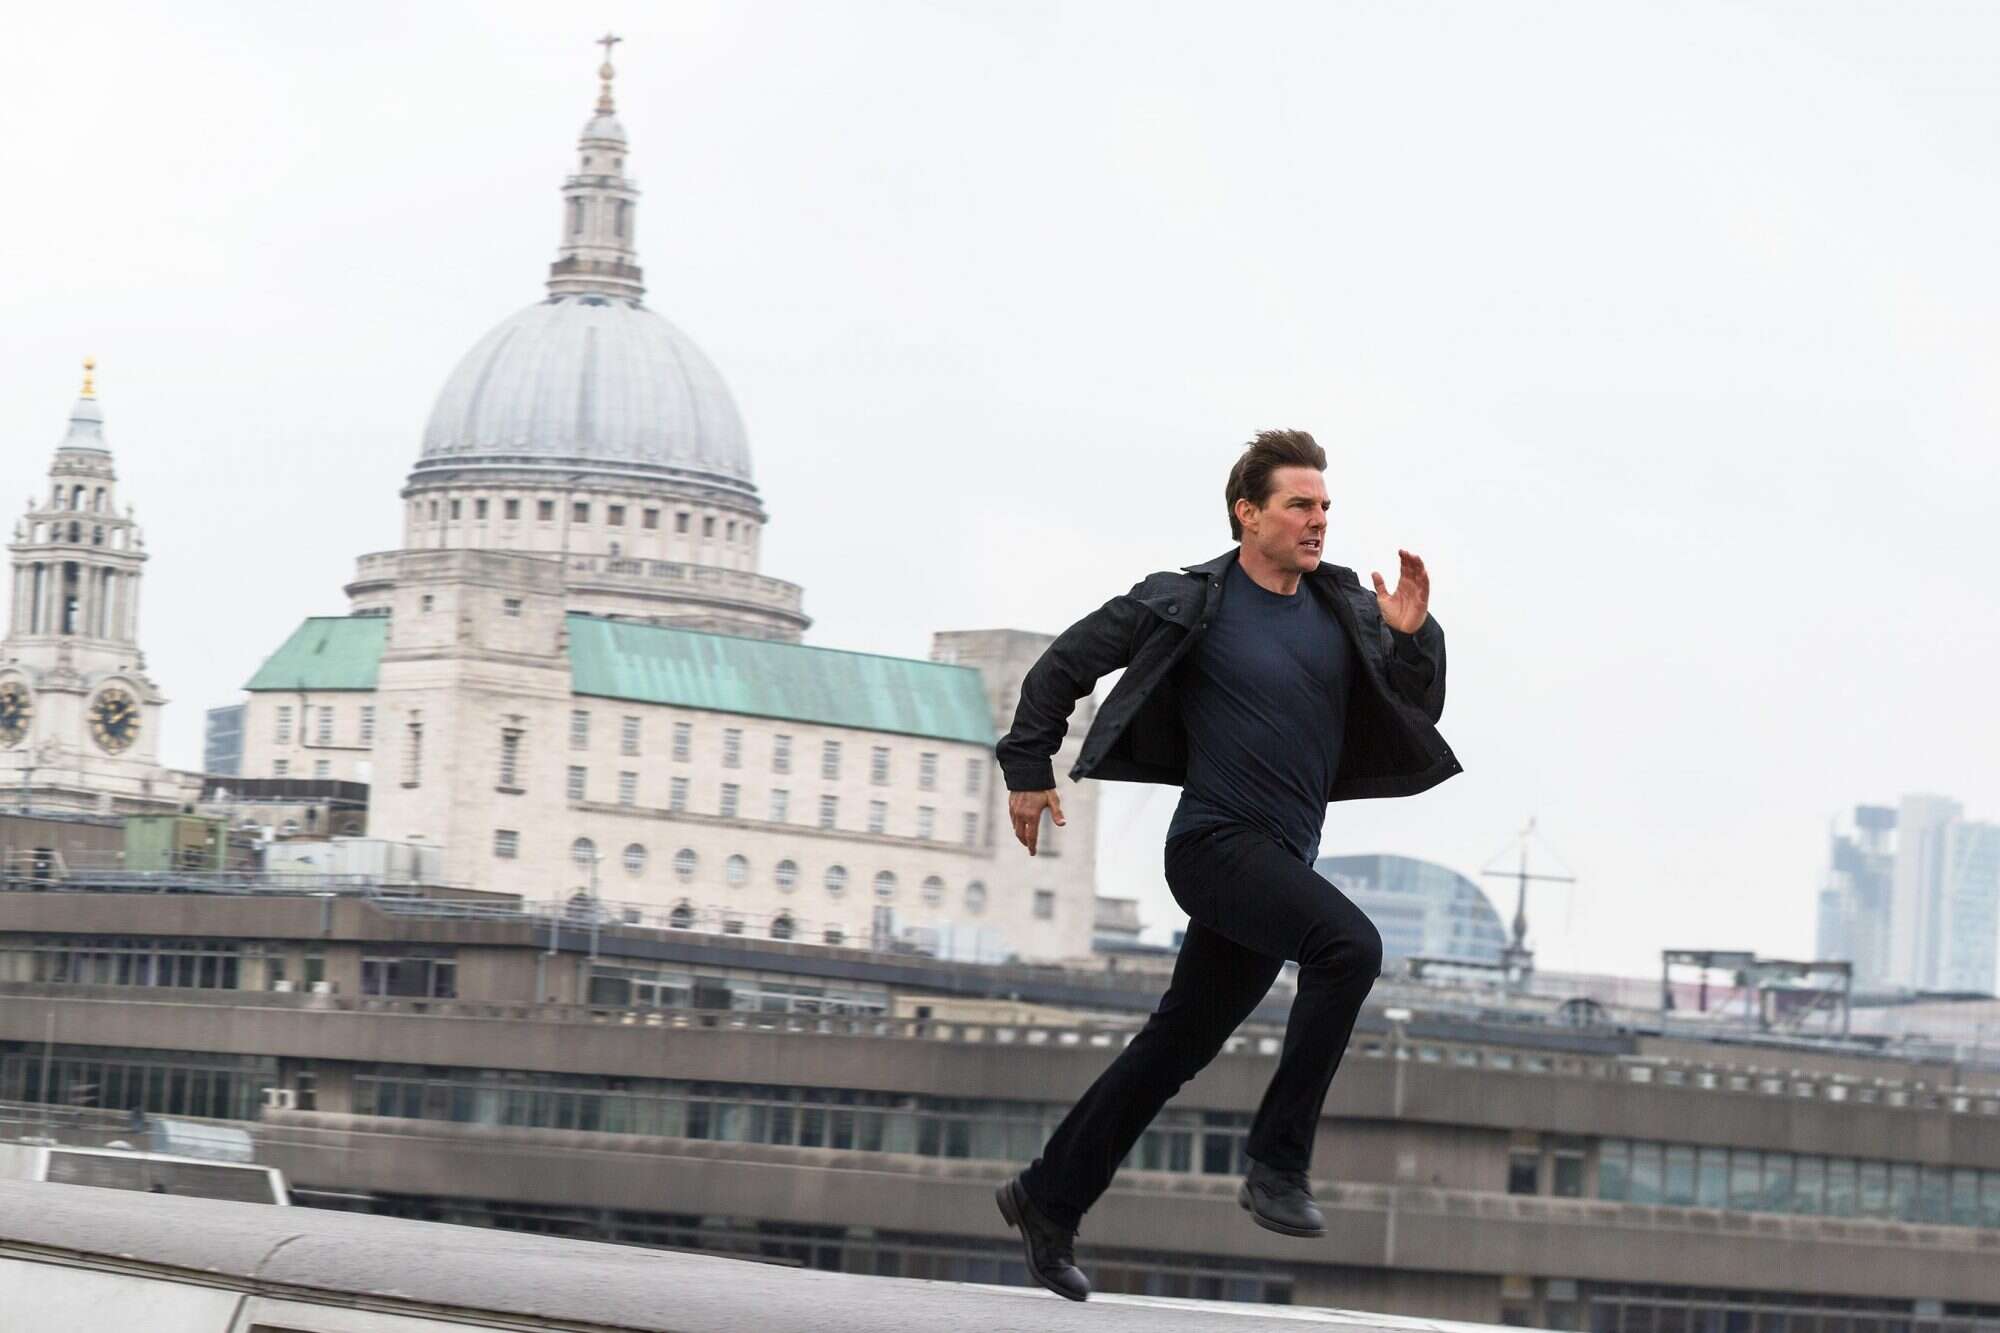 Mission: Impossible 7 and 8 set for 2021 and 2022